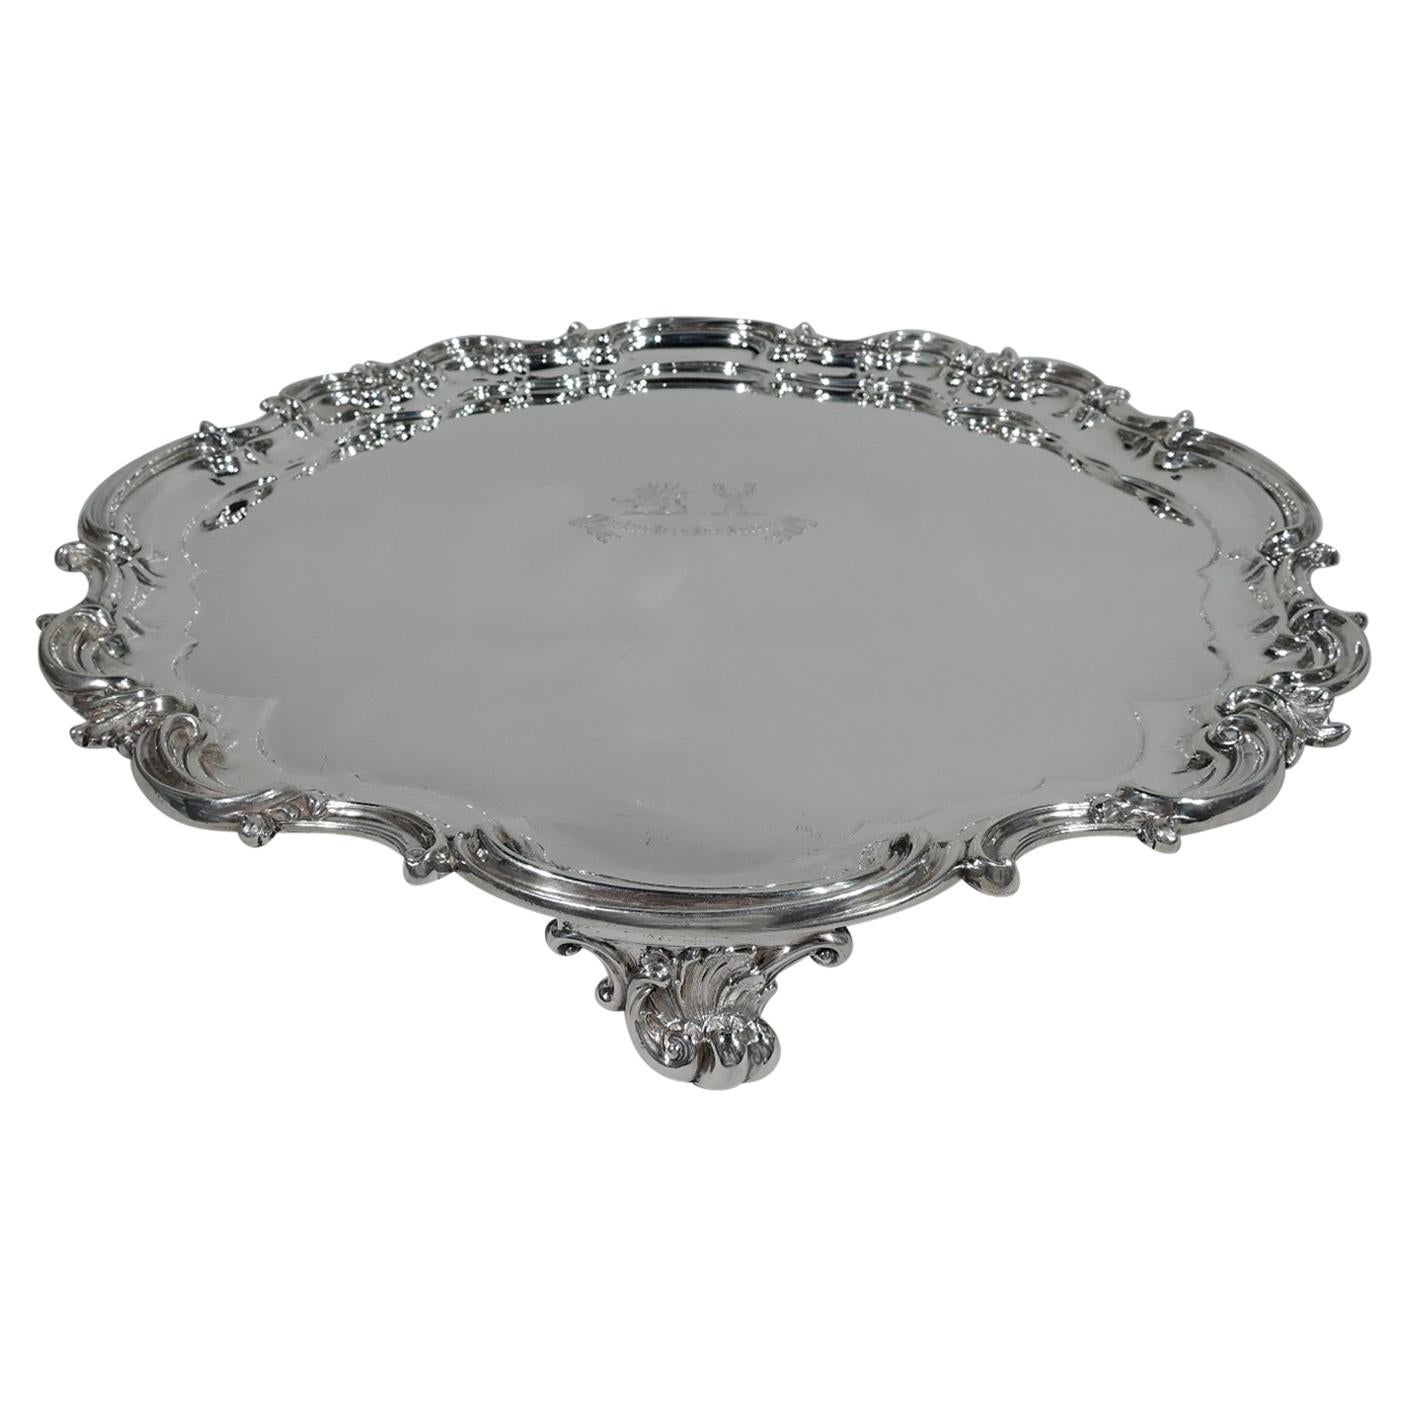 Antique English Sterling Silver Salver with Aristocratic Presentation